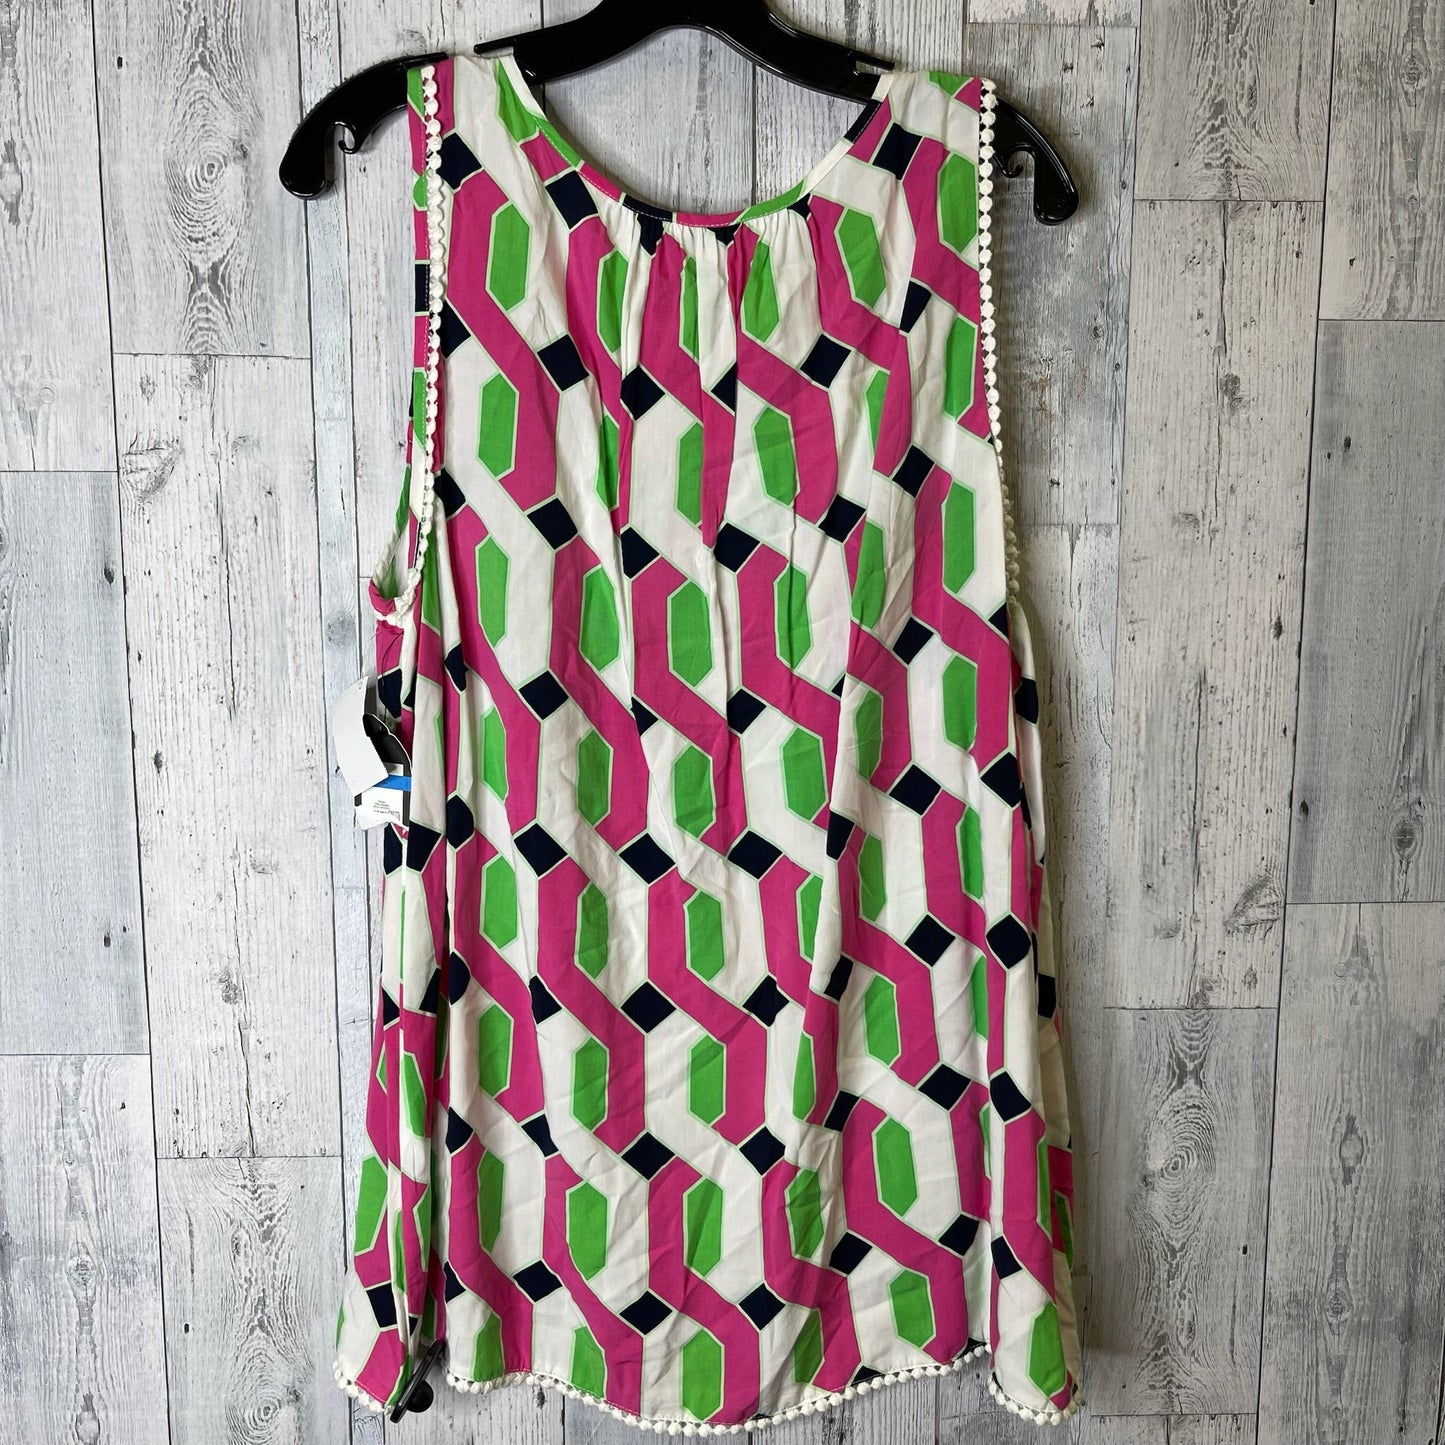 Top Sleeveless By Crown And Ivy  Size: Xl